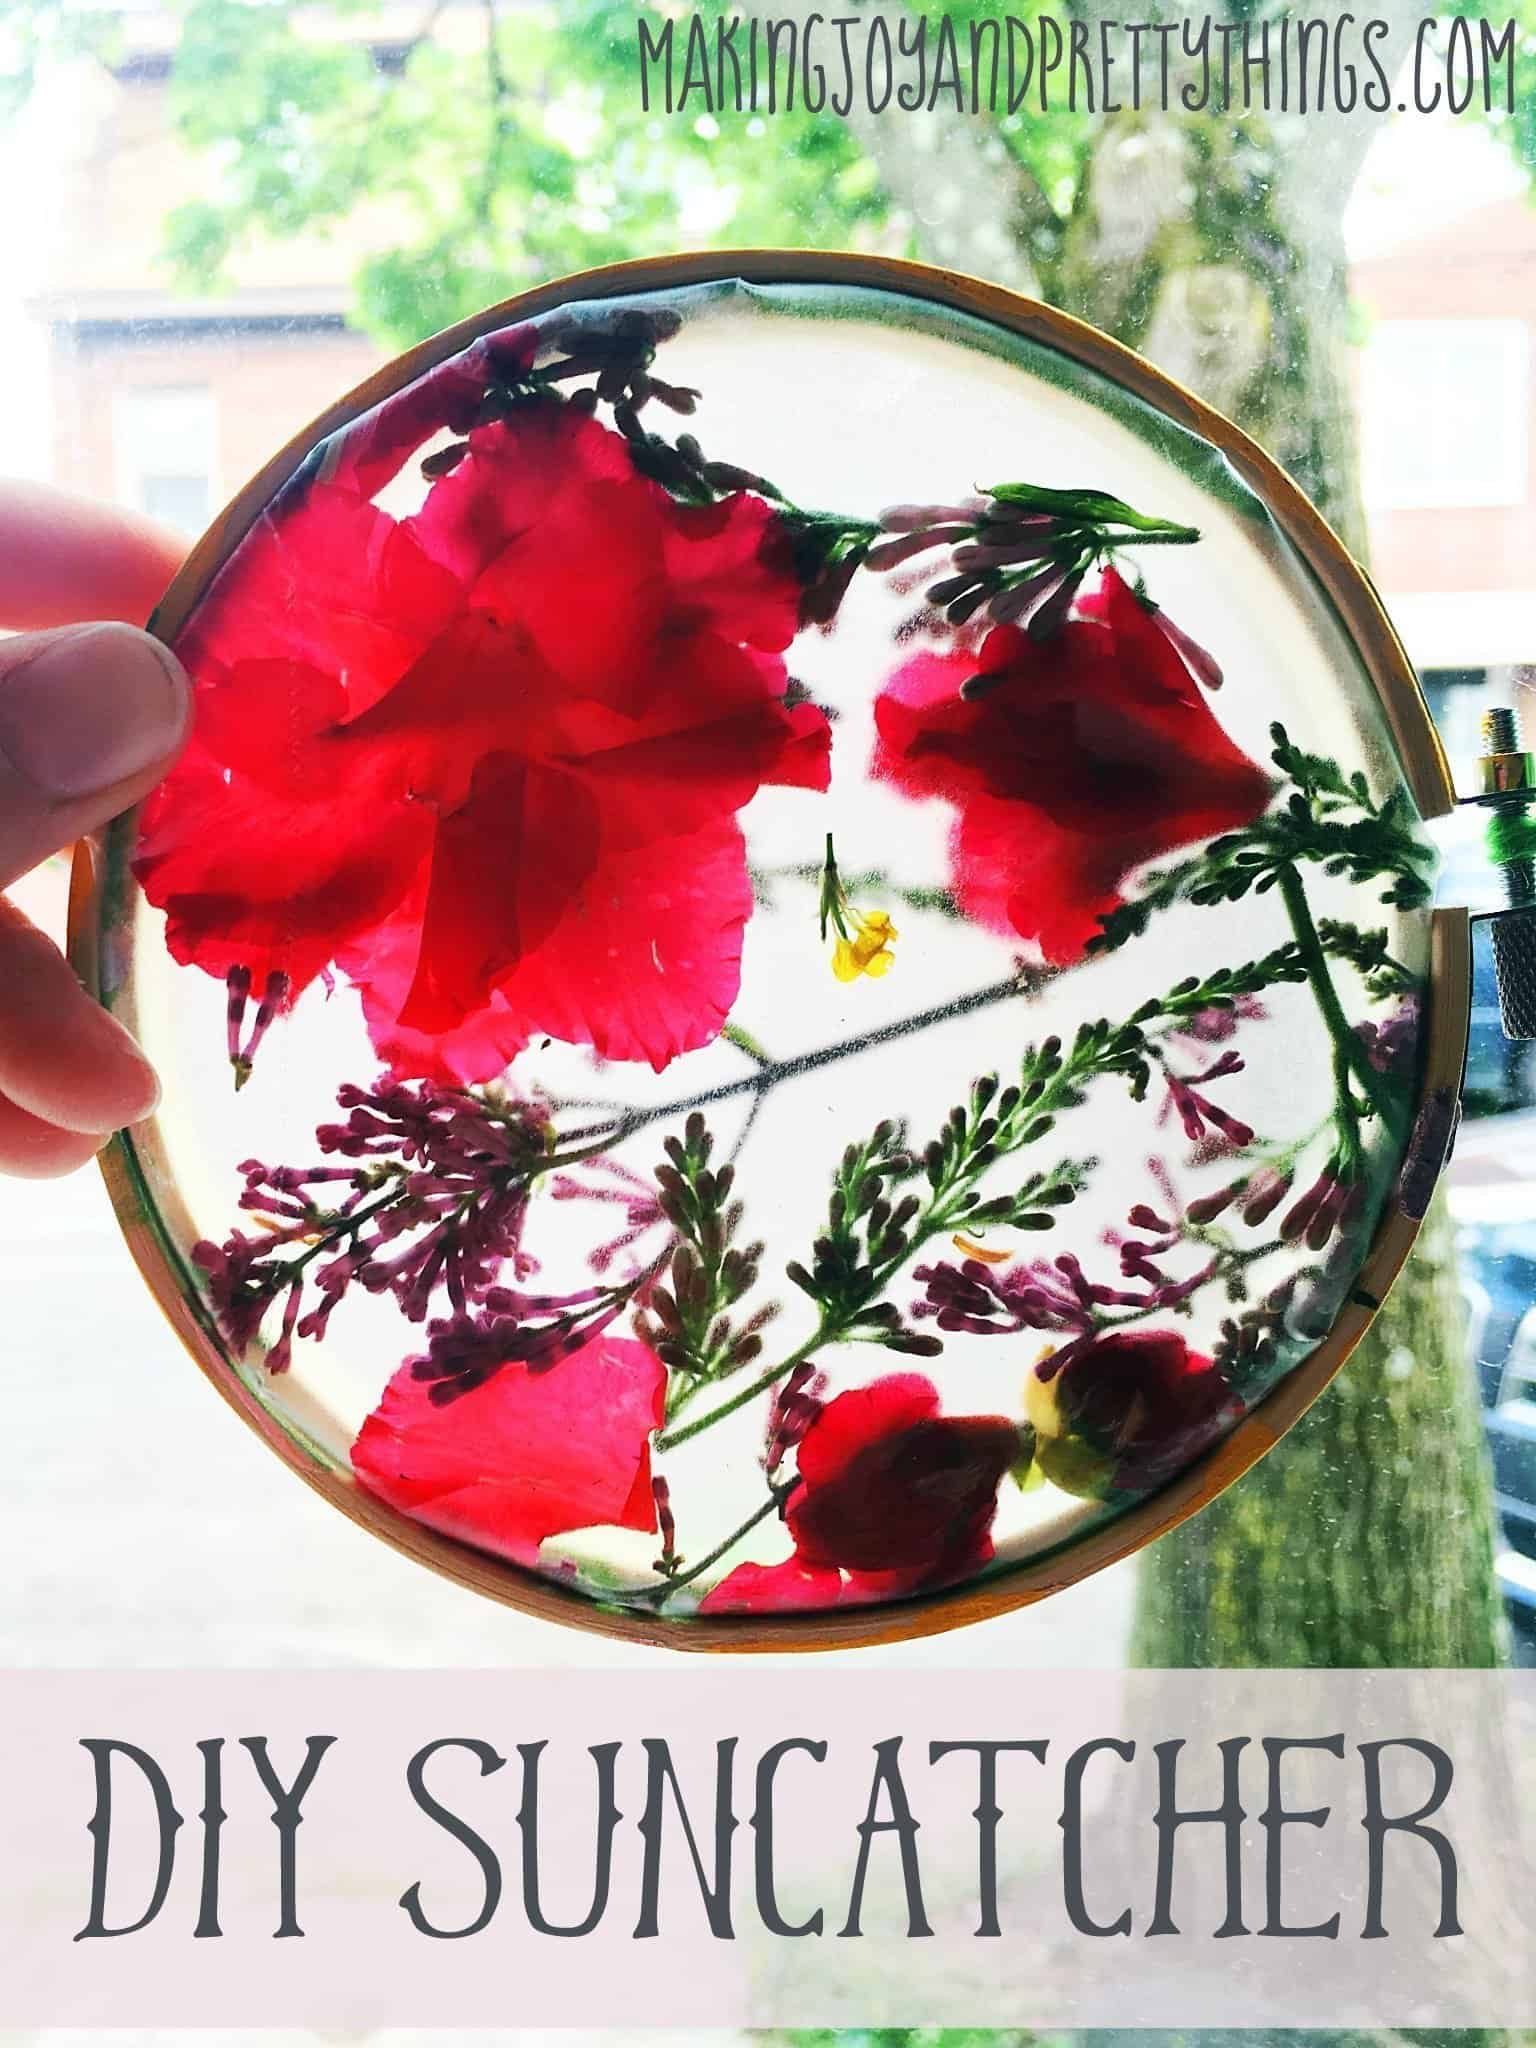 Easy DIY suncatcher craft for kids. Perfect gift for teachers, grandmothers and mothers for Mother's Day! Also great spring and summer outdoor craft for kids.